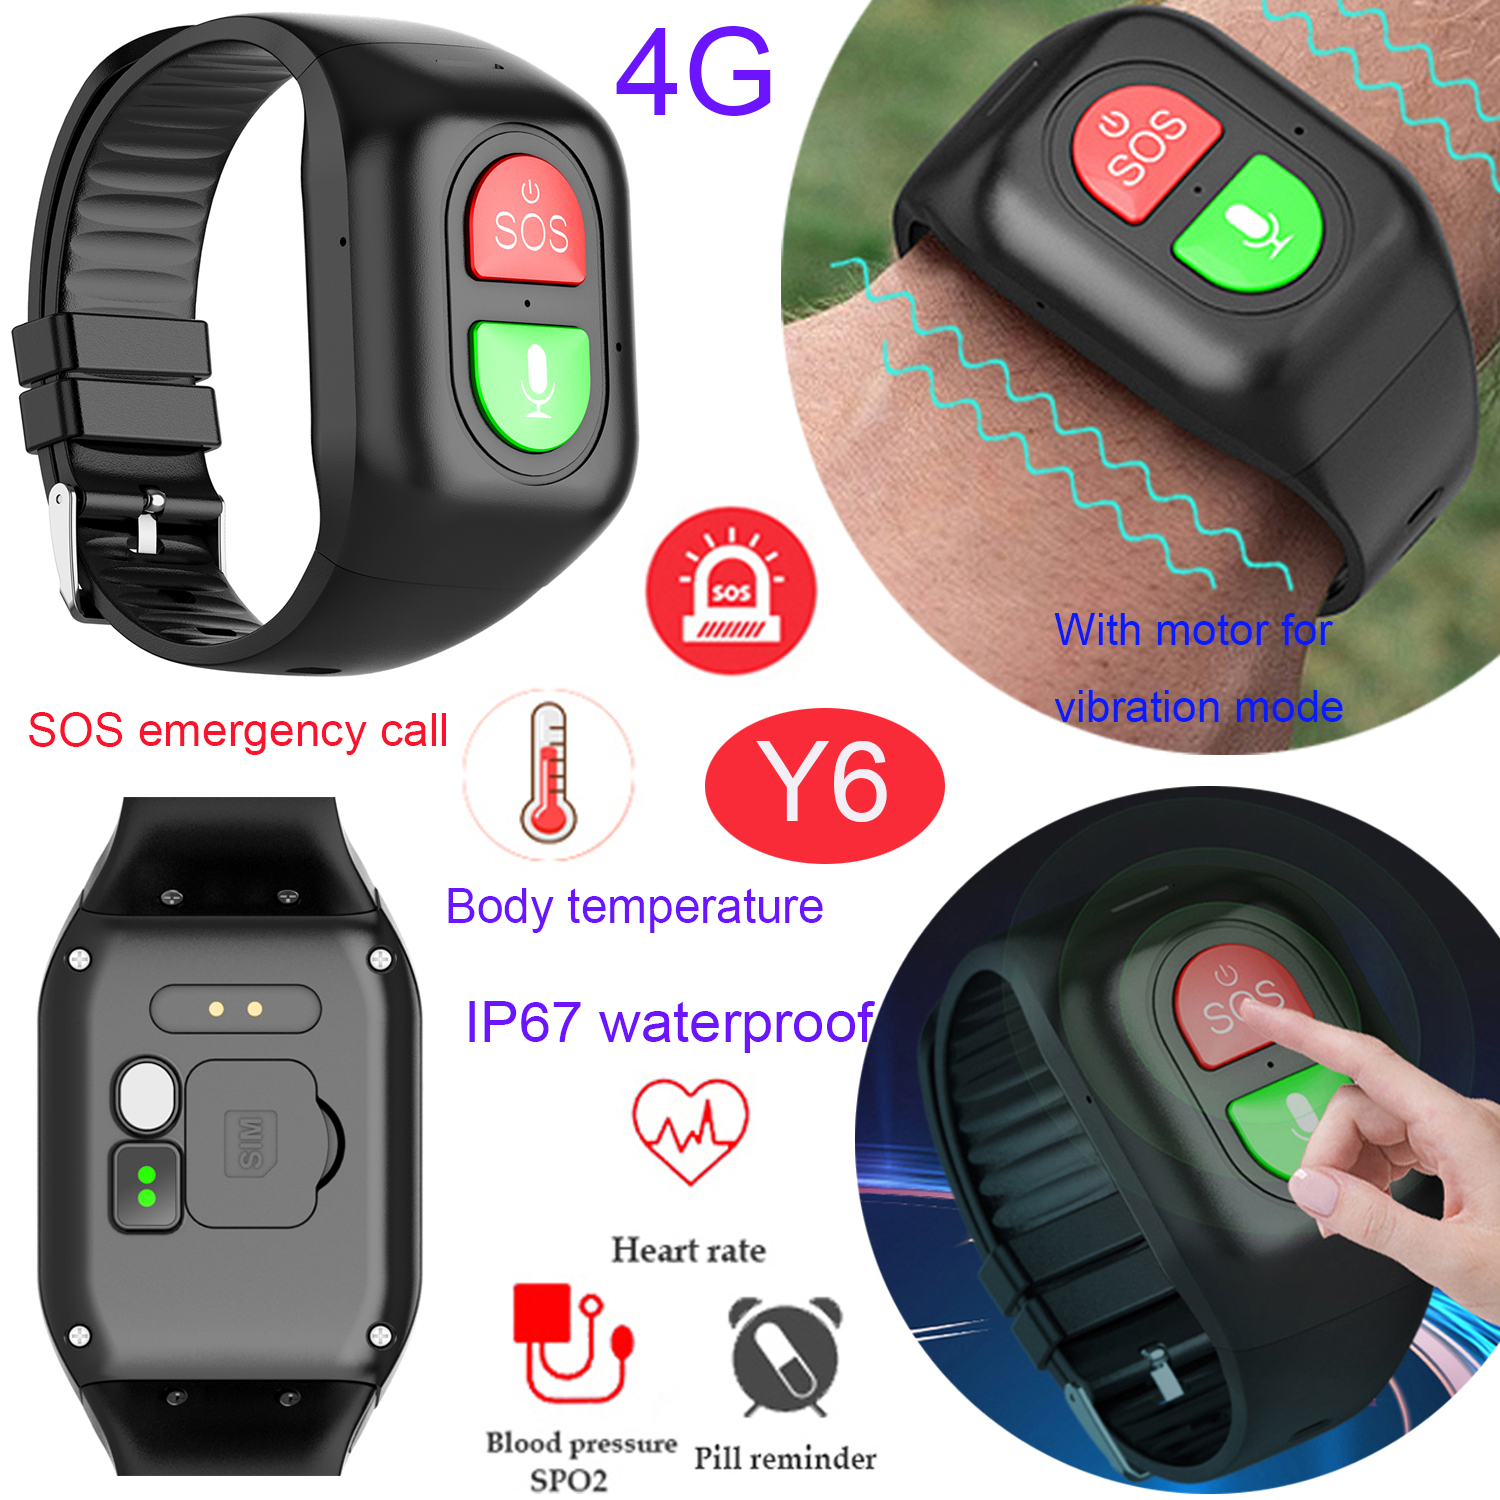 Why Big screen, full touch and body temperature detection become the new  trend of smart bracelet watches in 2020?